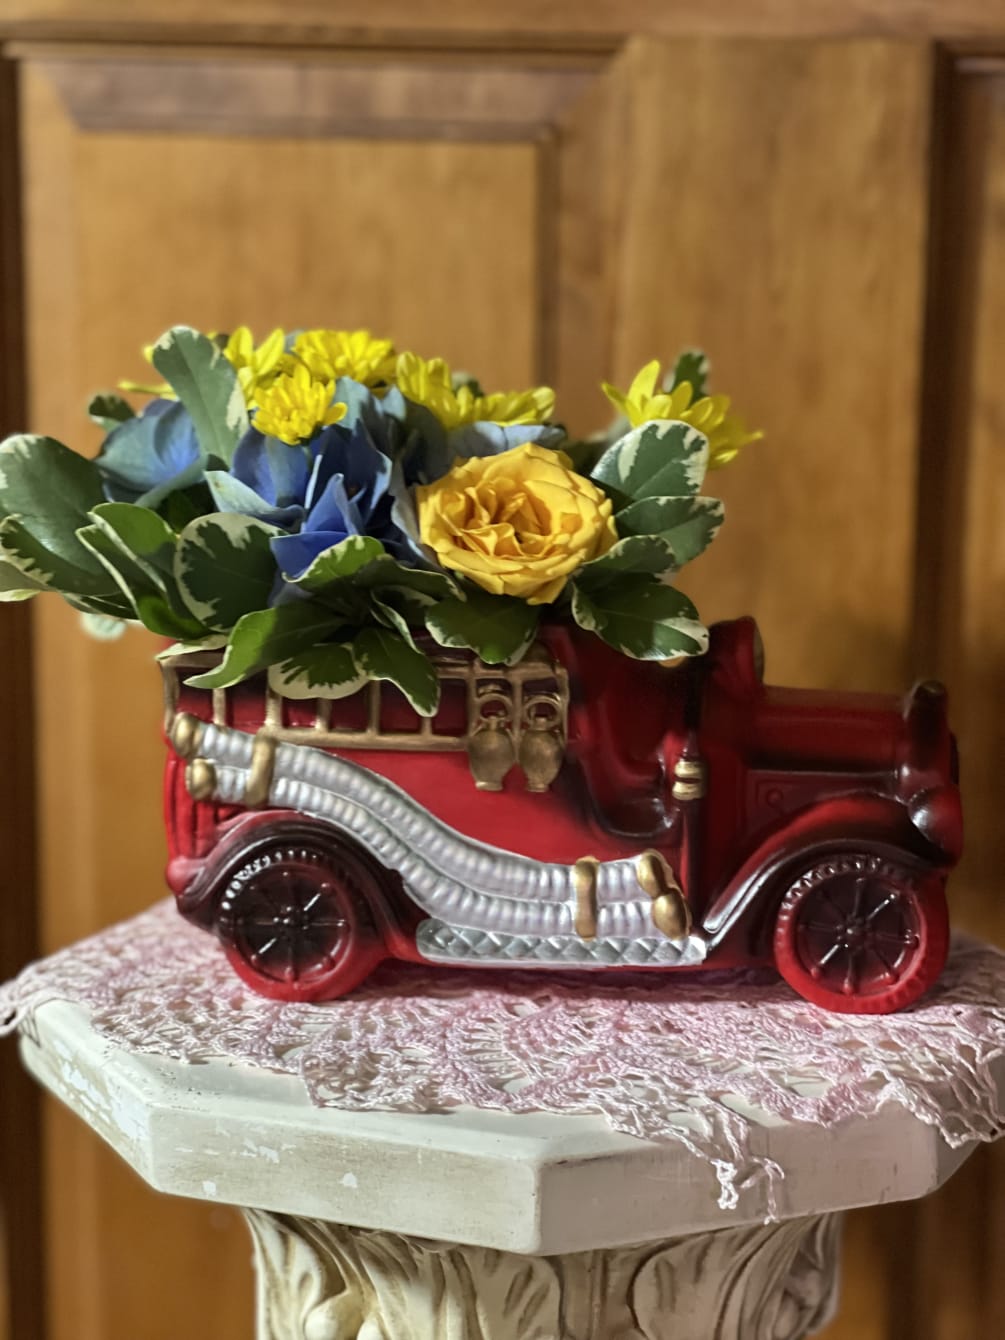 Our Antique Firetruck is sure to warm the hearts of anyone who